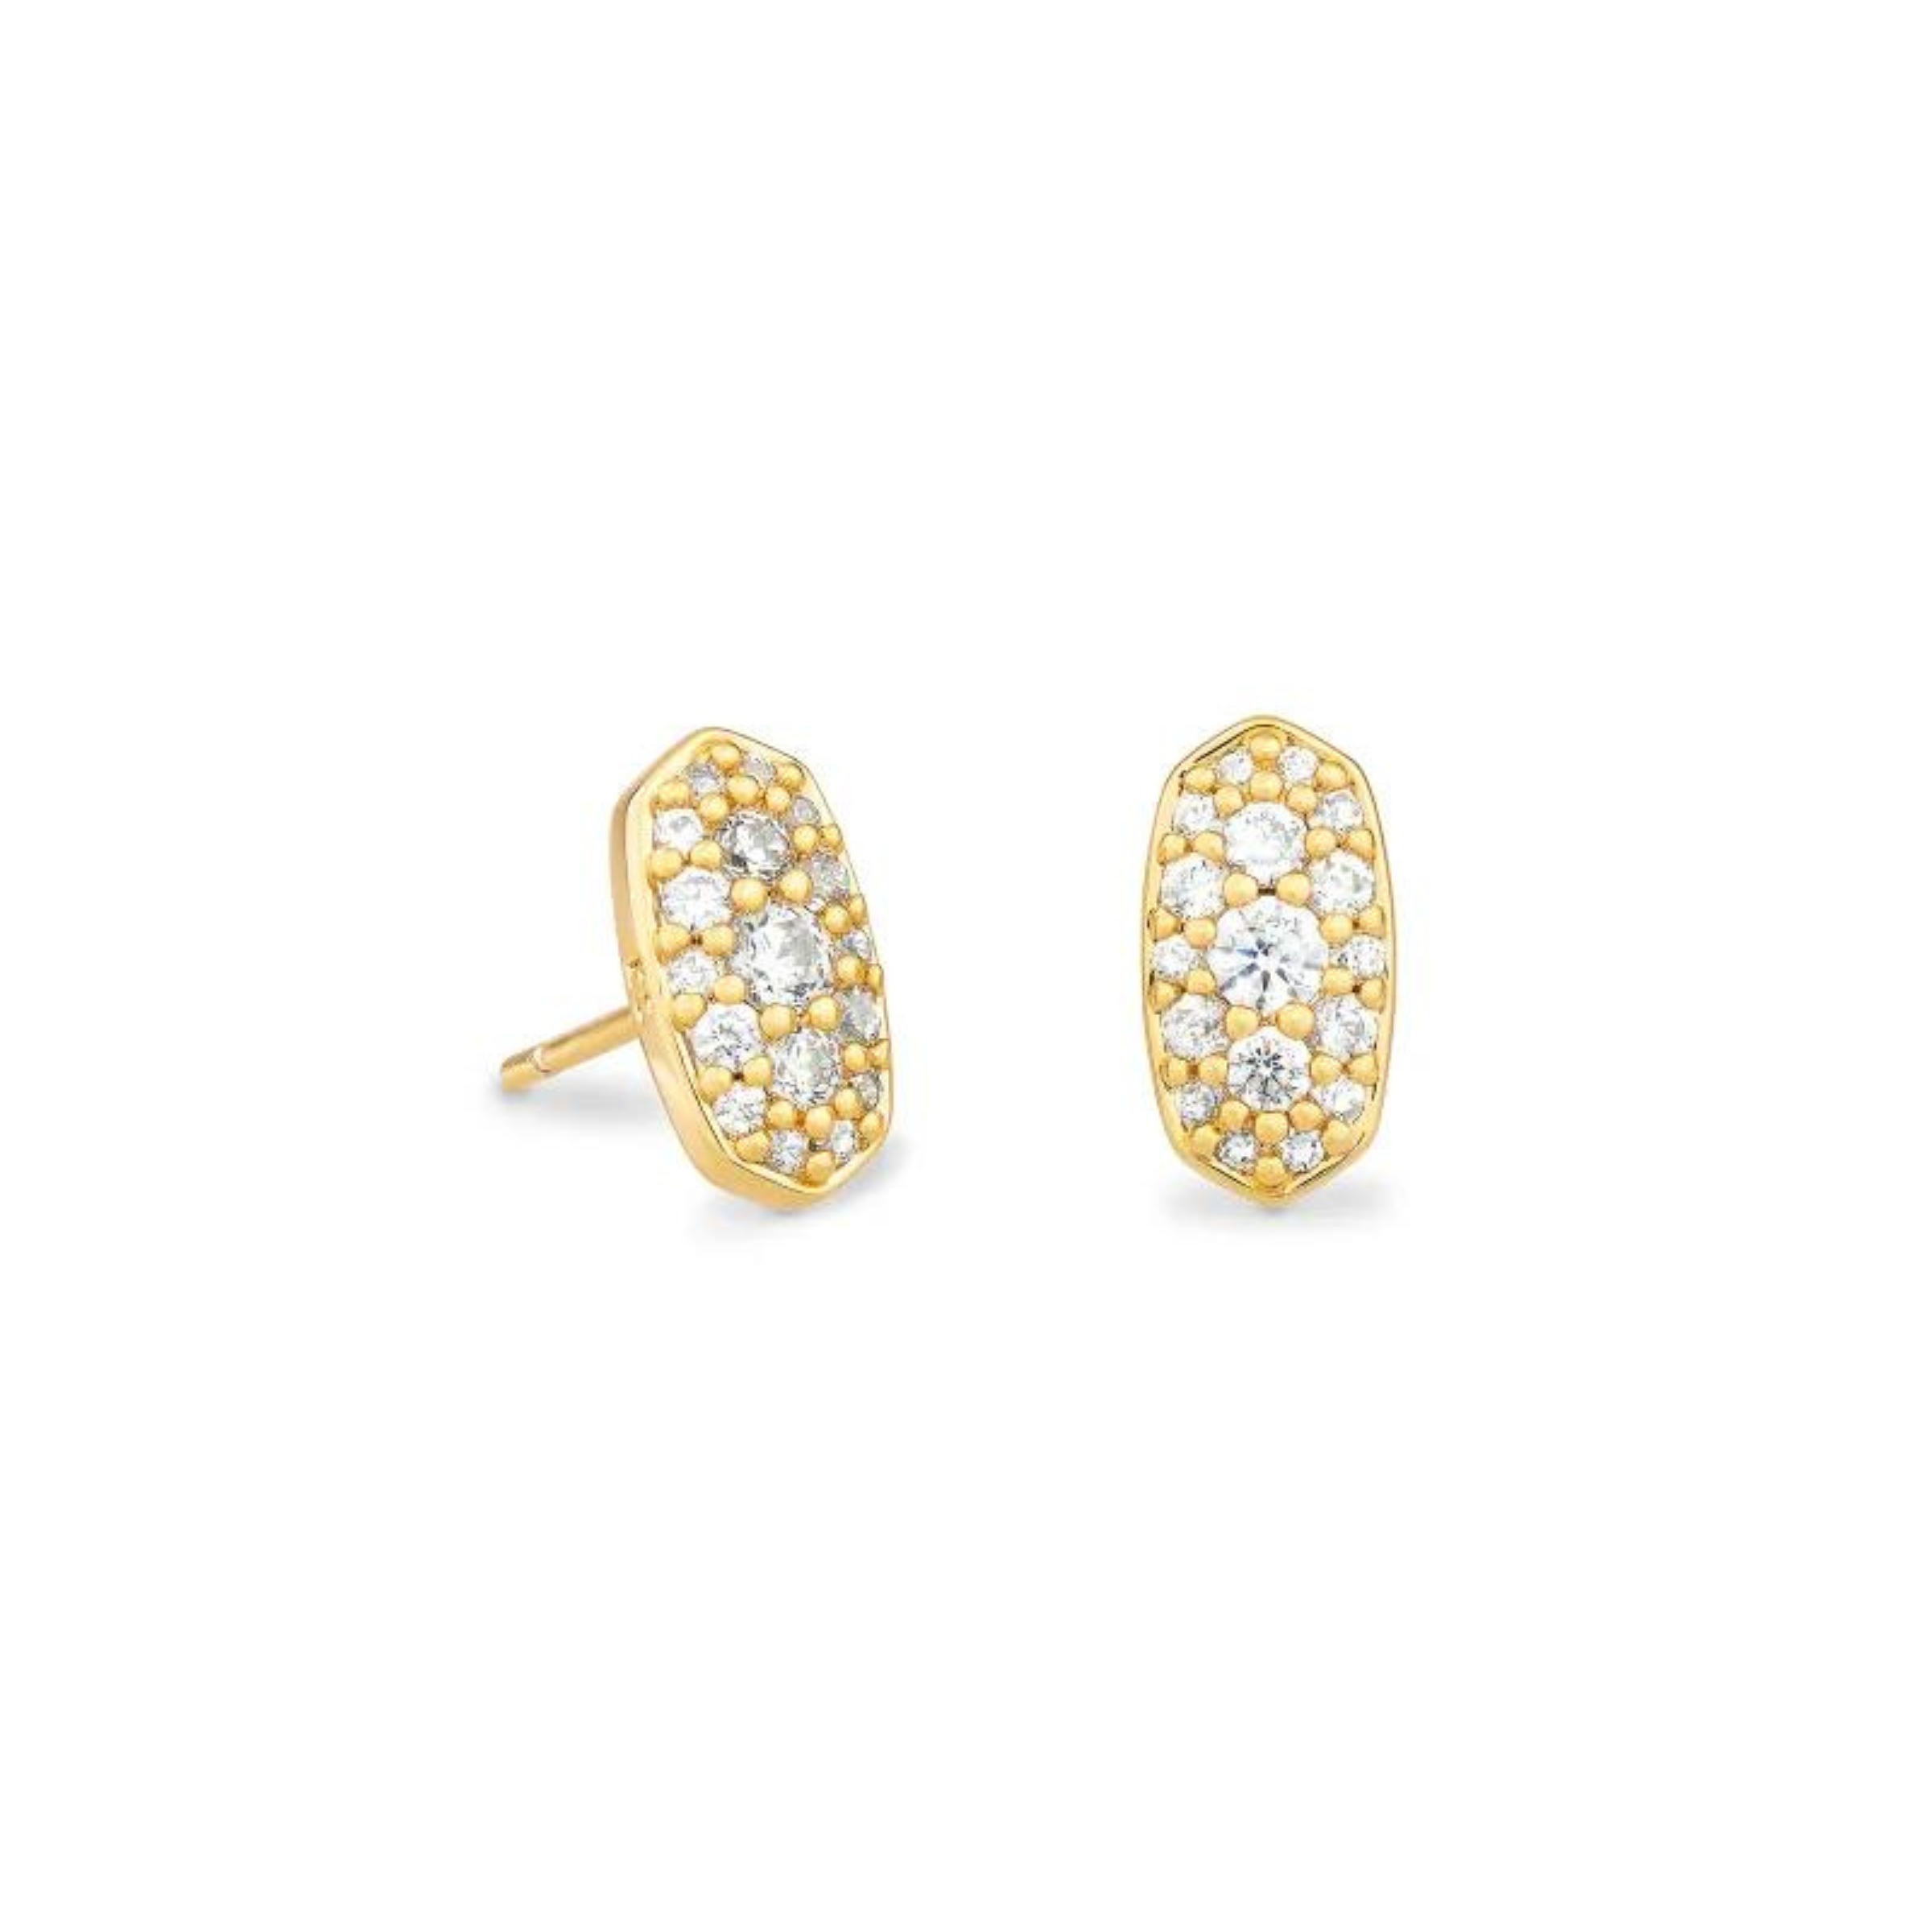 Gold, oval stud earrings with white crystals. These earrings are pictured on a white background. 